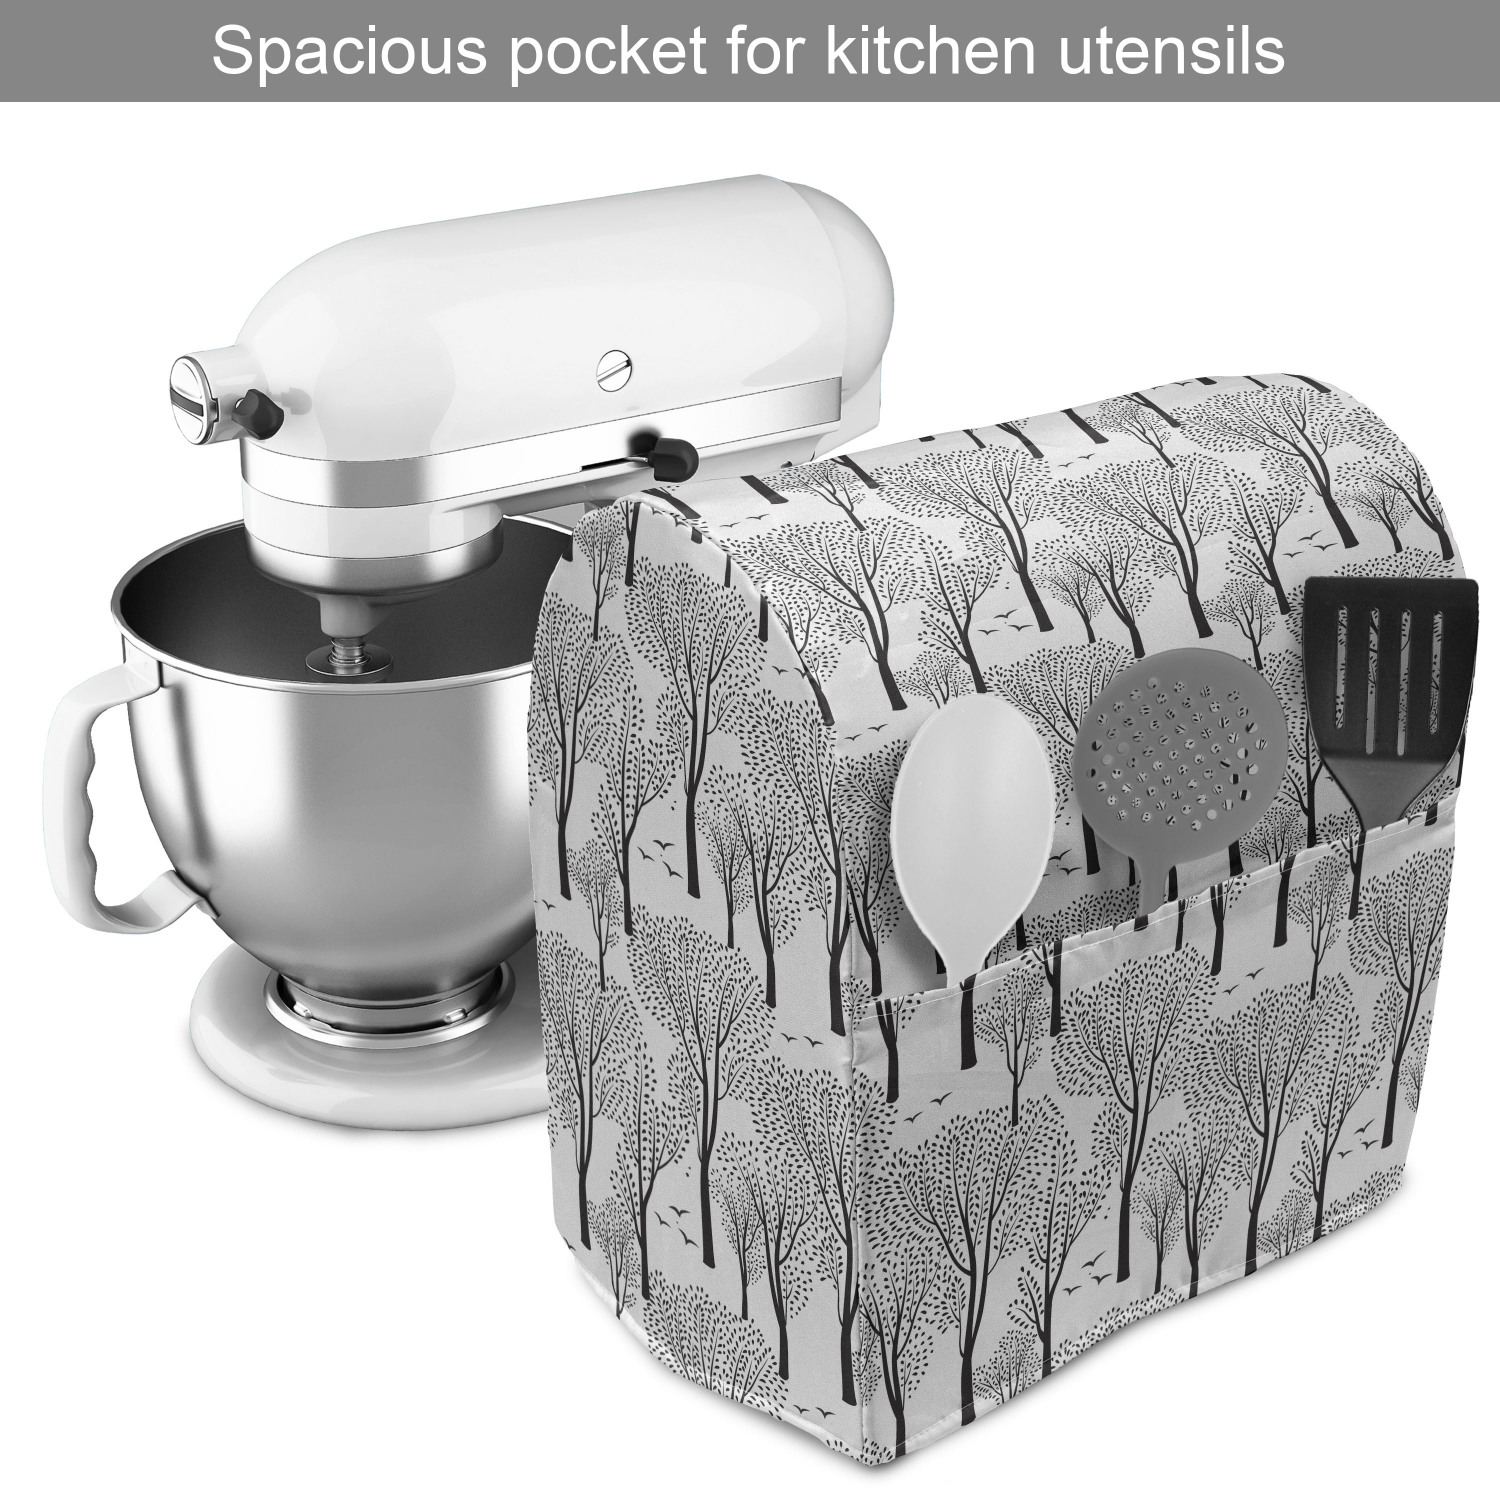 Winter Stand Mixer Cover, Monochrome Abstract Forest Pattern Trees Leaves Birds Wildlife Woodland Nature, Kitchen Appliance Organizer Bag Cover with Pockets, 5 Quarts, Black White, by Ambesonne - image 2 of 4